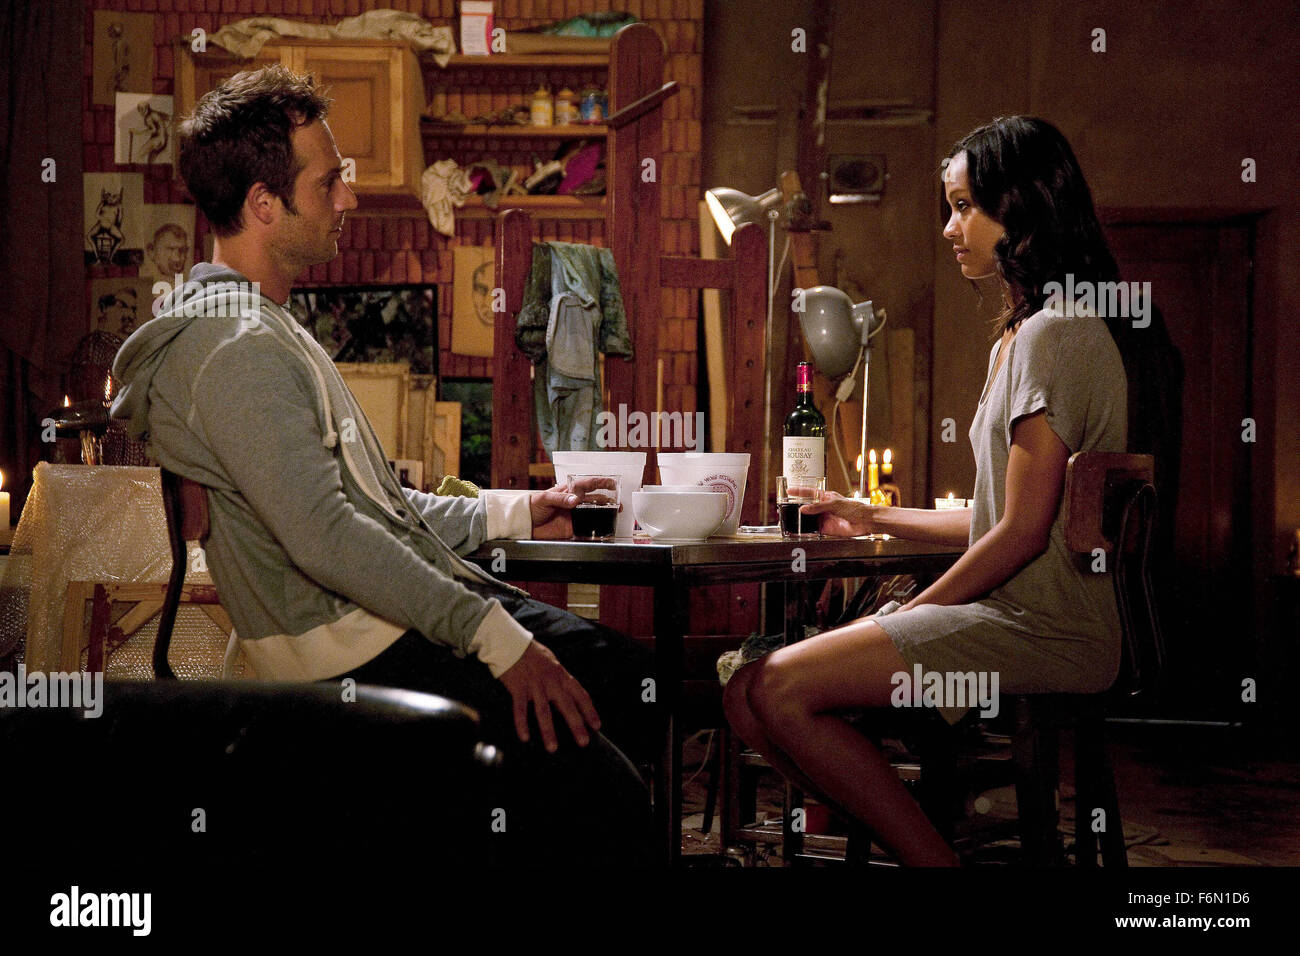 RELEASE DATE: August 26, 2011  TITLE: Colombiana  STUDIO: TriStar Pictures  DIRECTOR: Olivier Megaton  PLOT: A young woman, after witnessing her parents' murder as a child in Bogota, grows up to be a stone-cold assassin  PICTURED: MICHAEL VARTAN as Danny Delaney and ZOE SALDANA as Cataleya  (Credit Image: c TriStar Pictures/Entertainment Pictures) Stock Photo